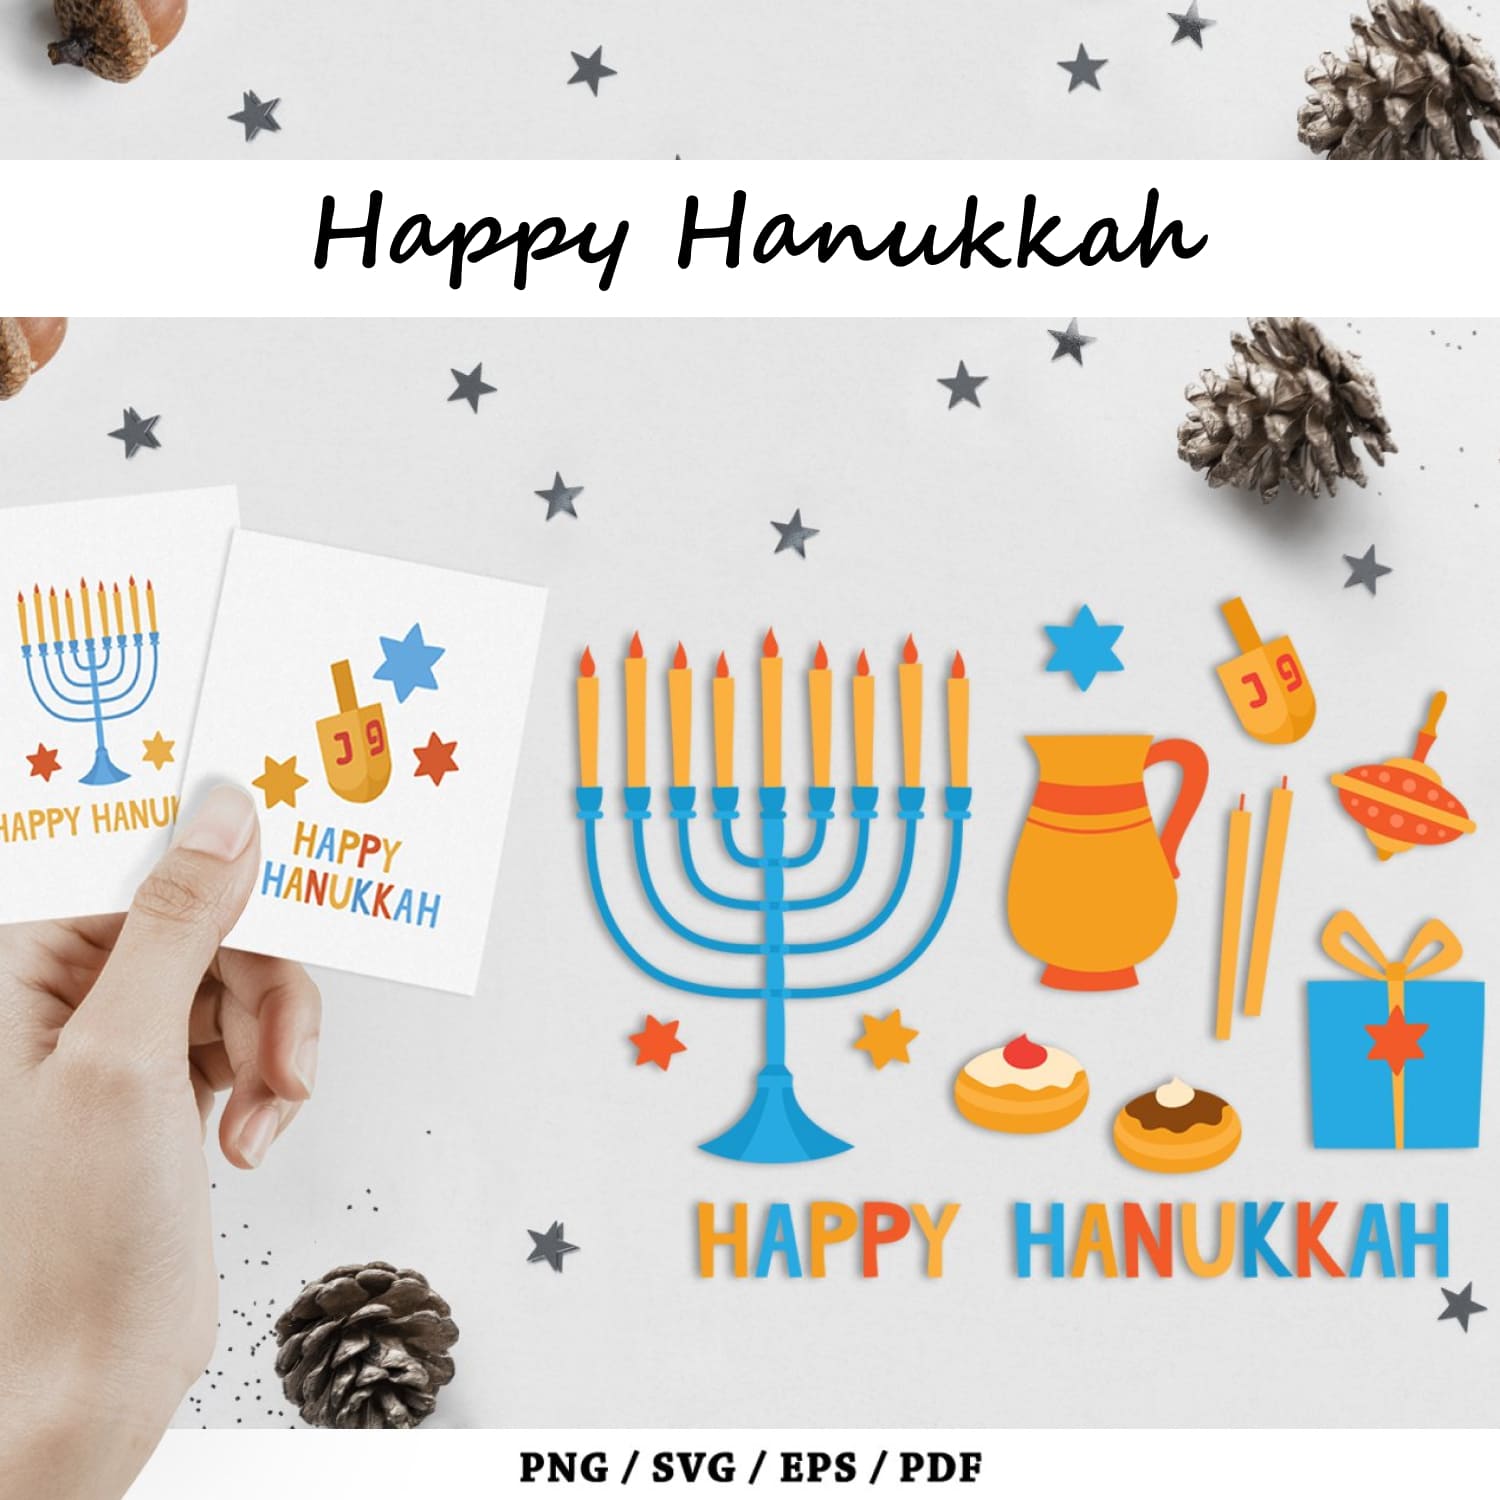 P:rints of happy hanukkah. elements and greeting cards.